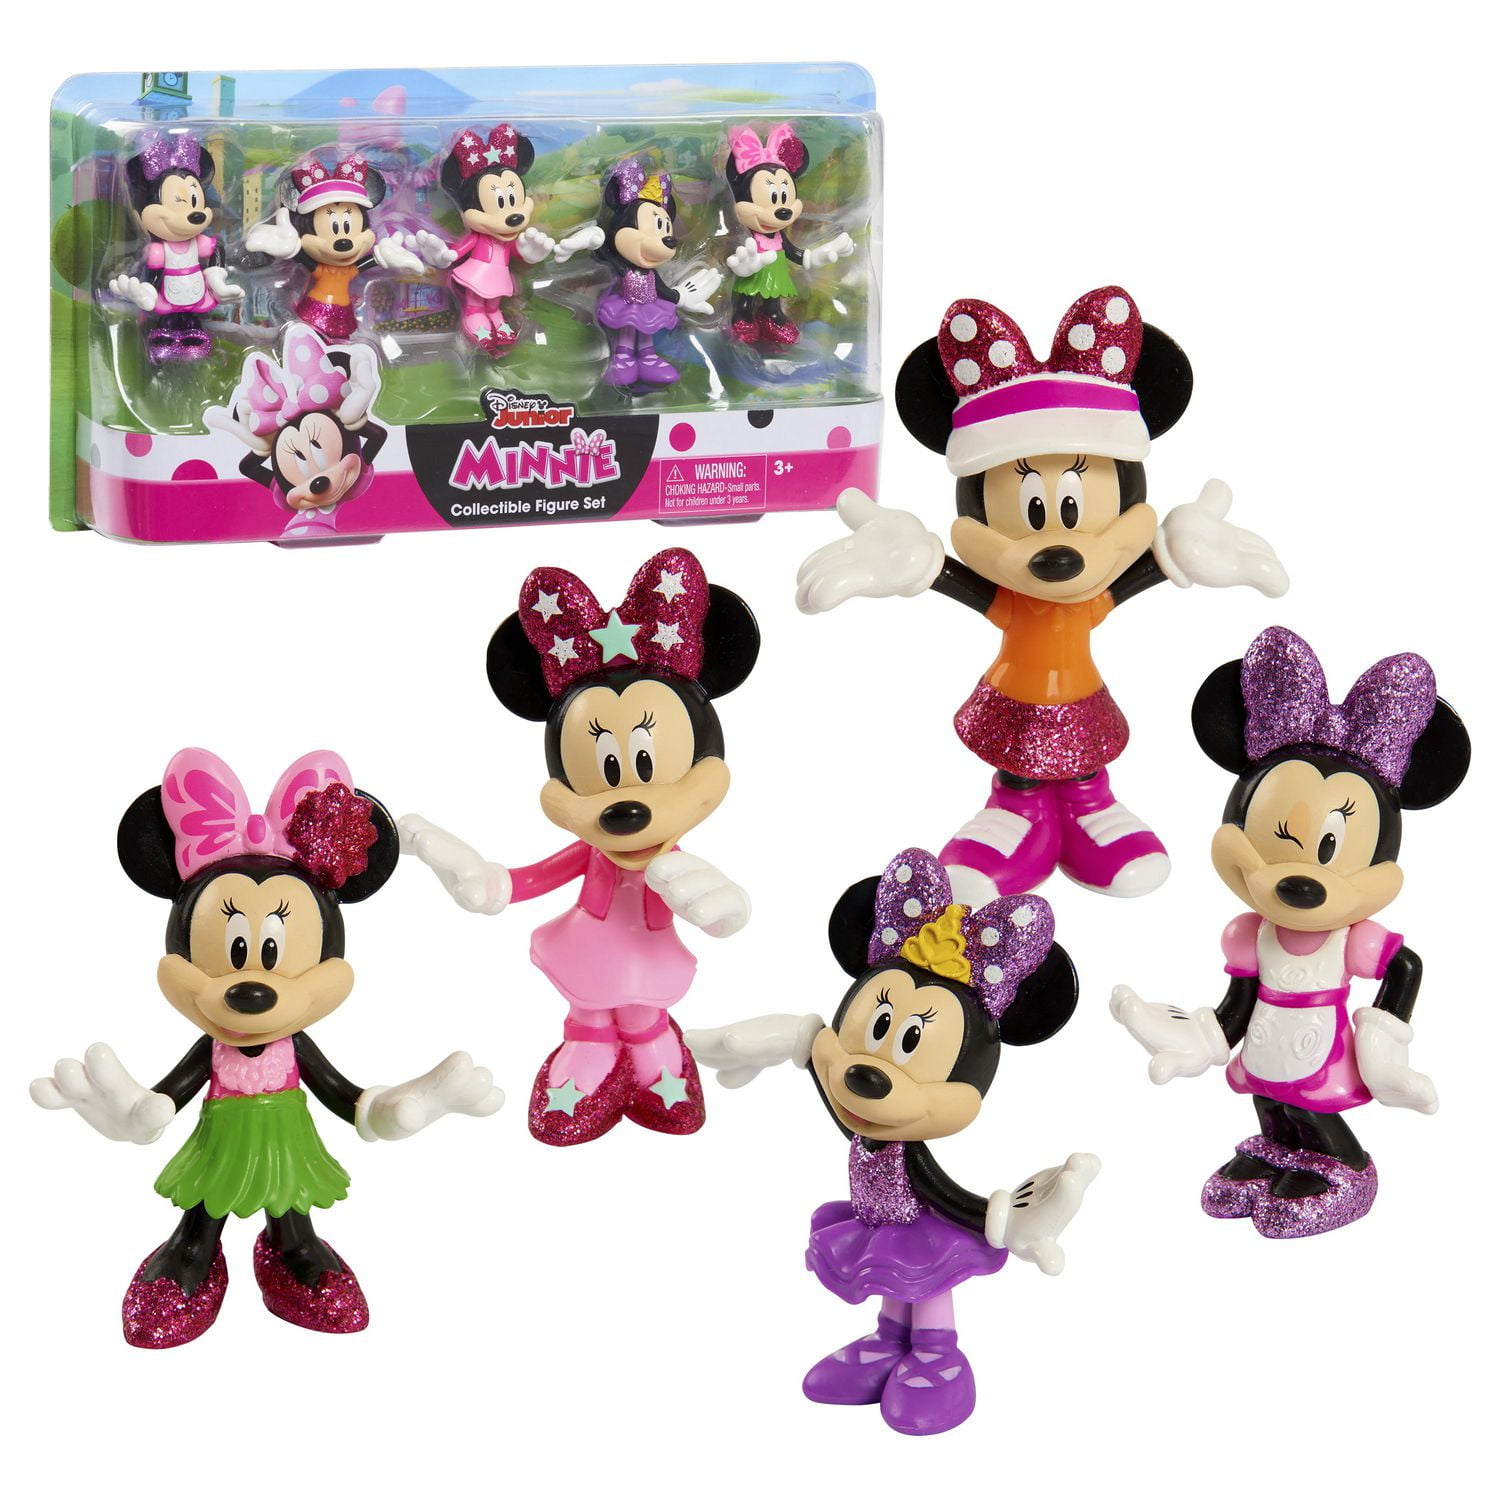 Disney: Minnie Mouse to swap her dress for a trouser suit